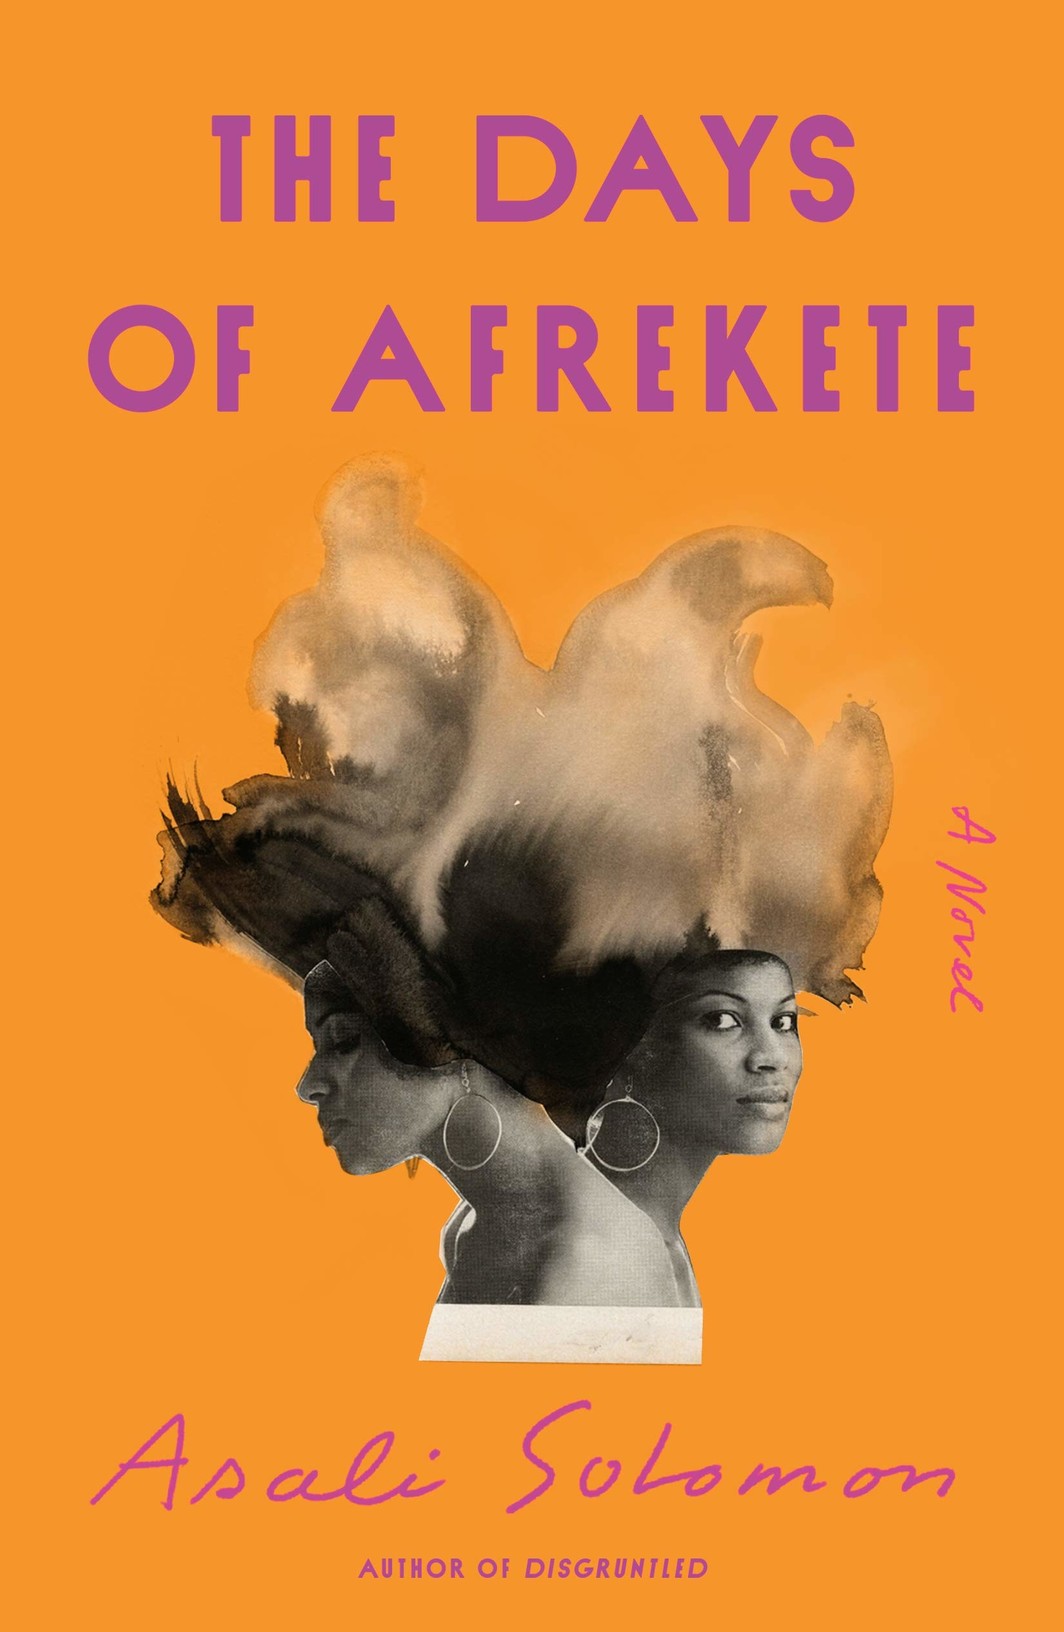 The cover of The Days of Afrekete